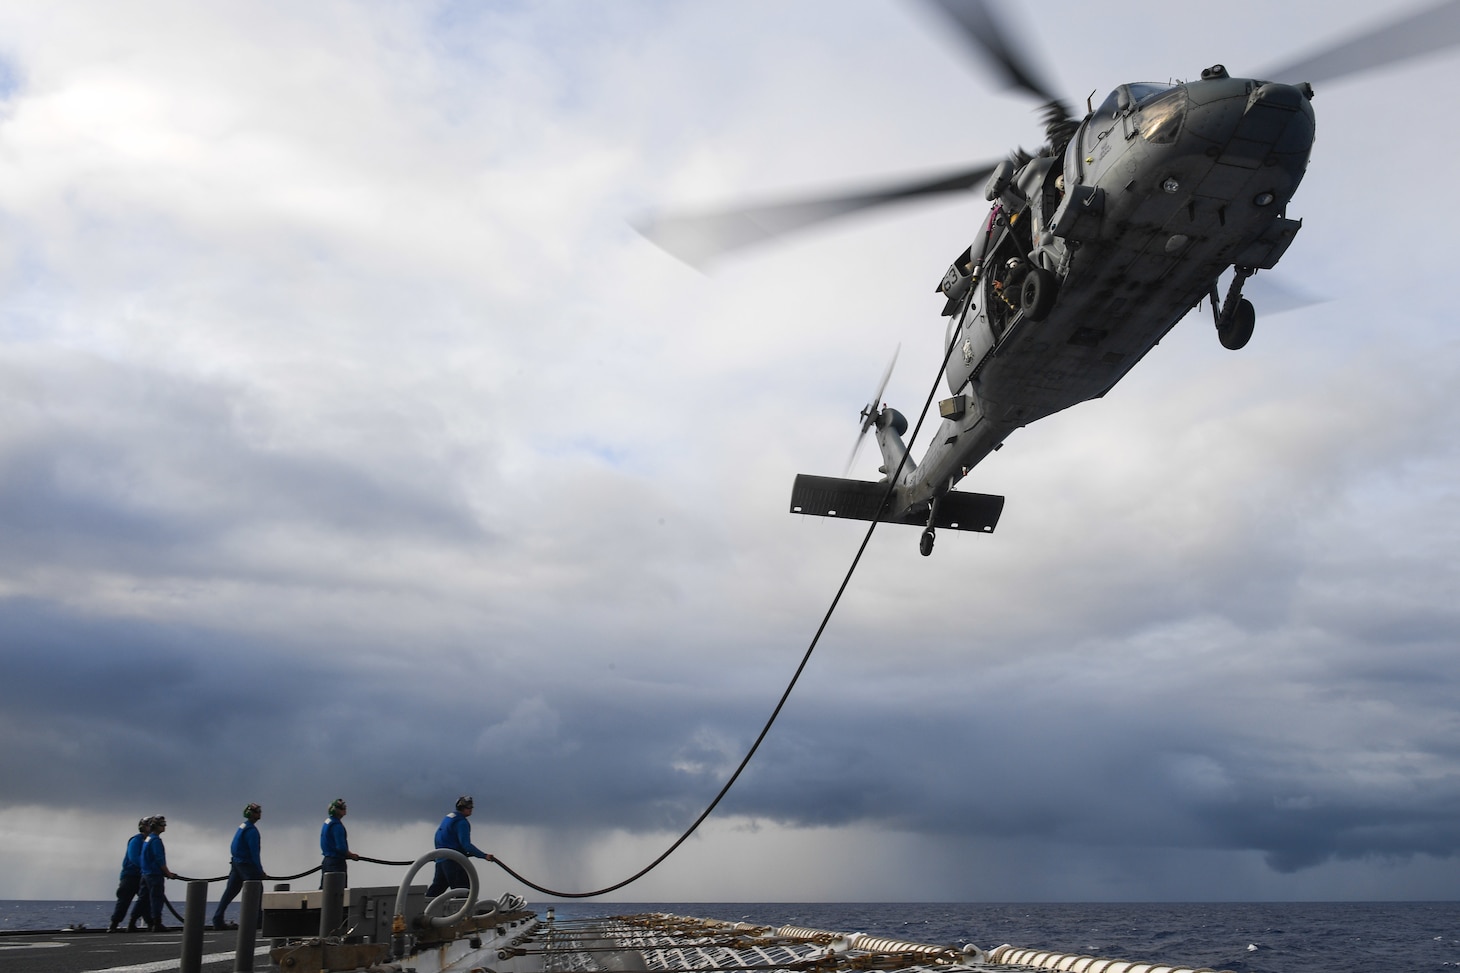 U.S. Coast Guardsmen assigned to the Legend-class cutter USCGC Munro (WMSL 755) conduct a helicopter in-flight refuel (HIFR) with an HM-60S Sea Hawk Helicopter assigned to Helicopter Sea Combat Squadron (HSC) 21, August 18.